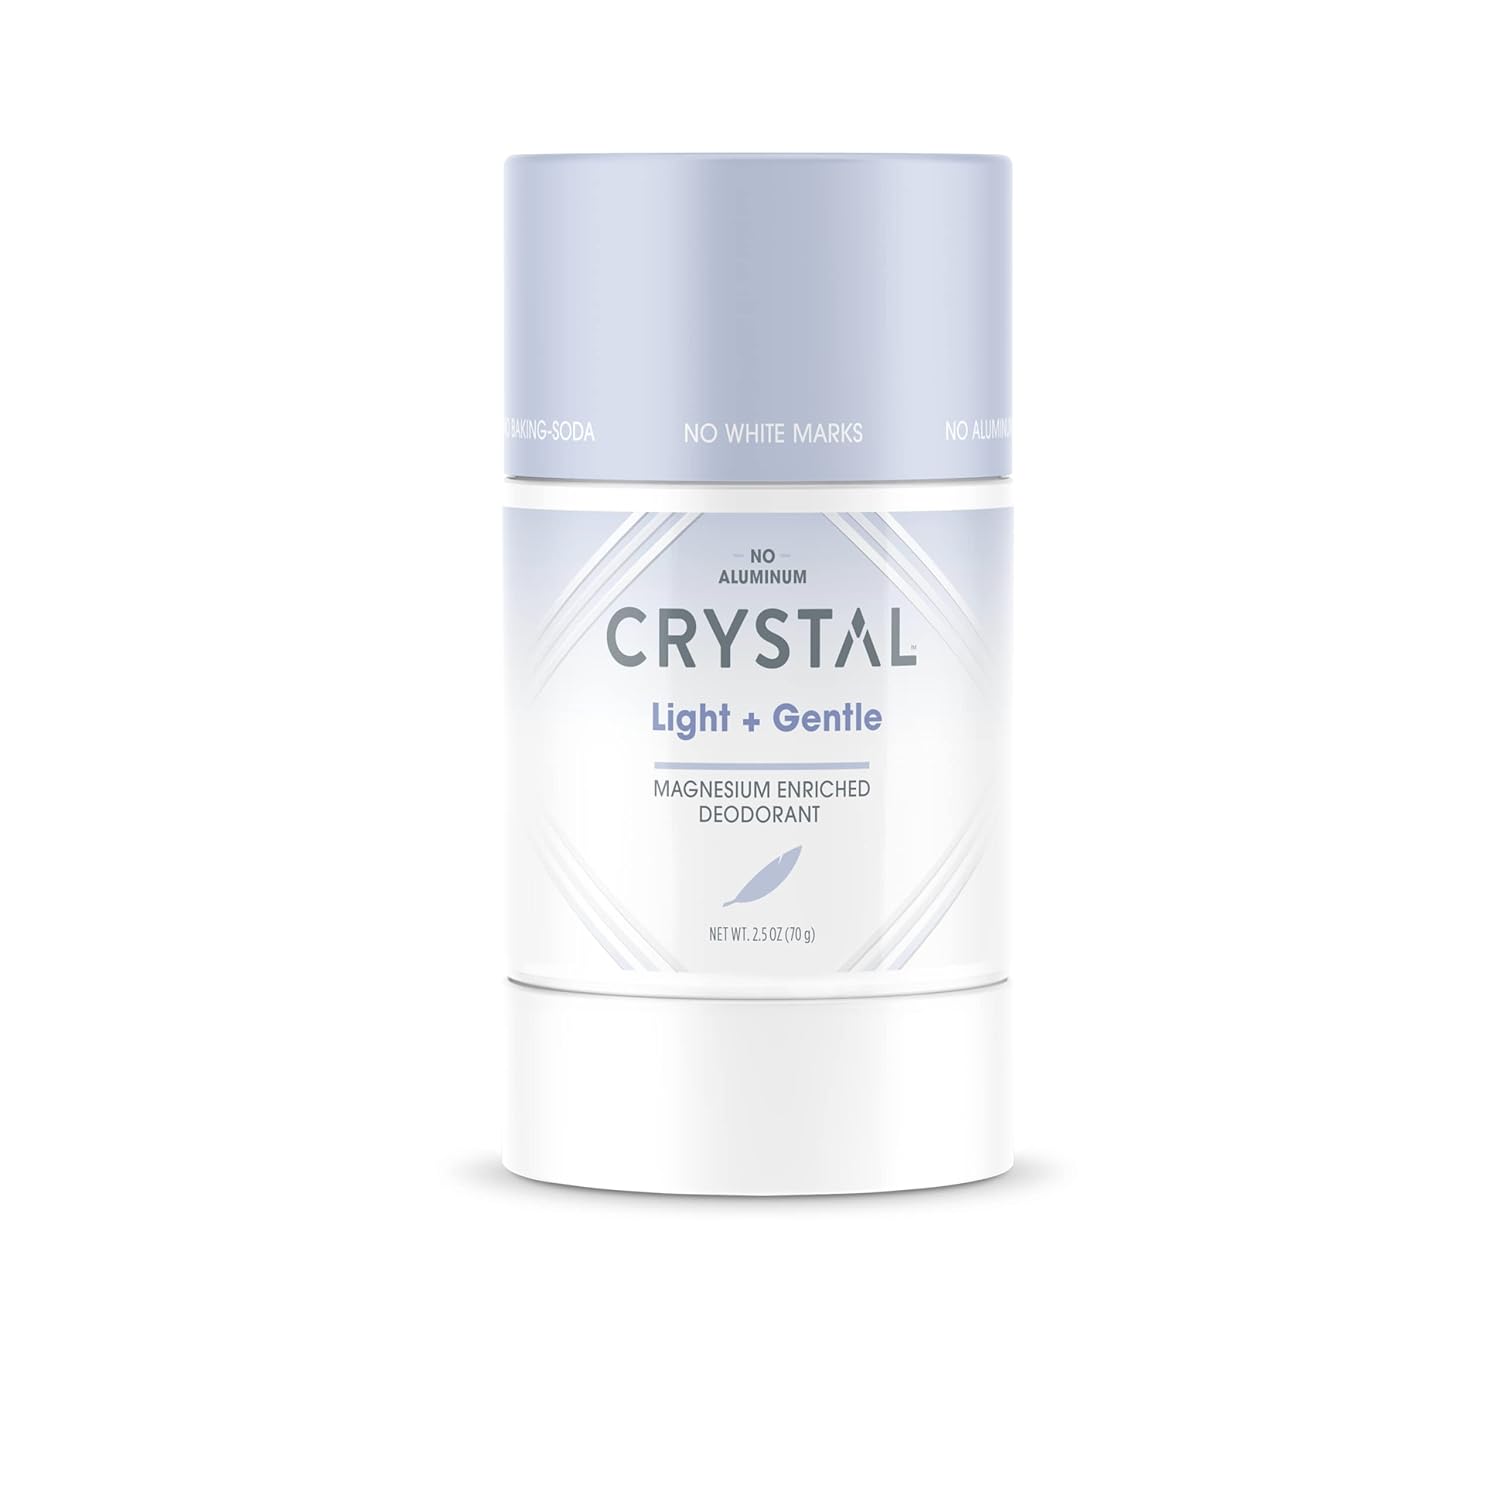 Crystal Magnesium Solid Stick Natural Deodorant, Non-Irritating Aluminum Free Deodorant for Men or Women, Safely and Effectively Fights Odor, Baking Soda Free,Light + Gentle (2.5 oz)